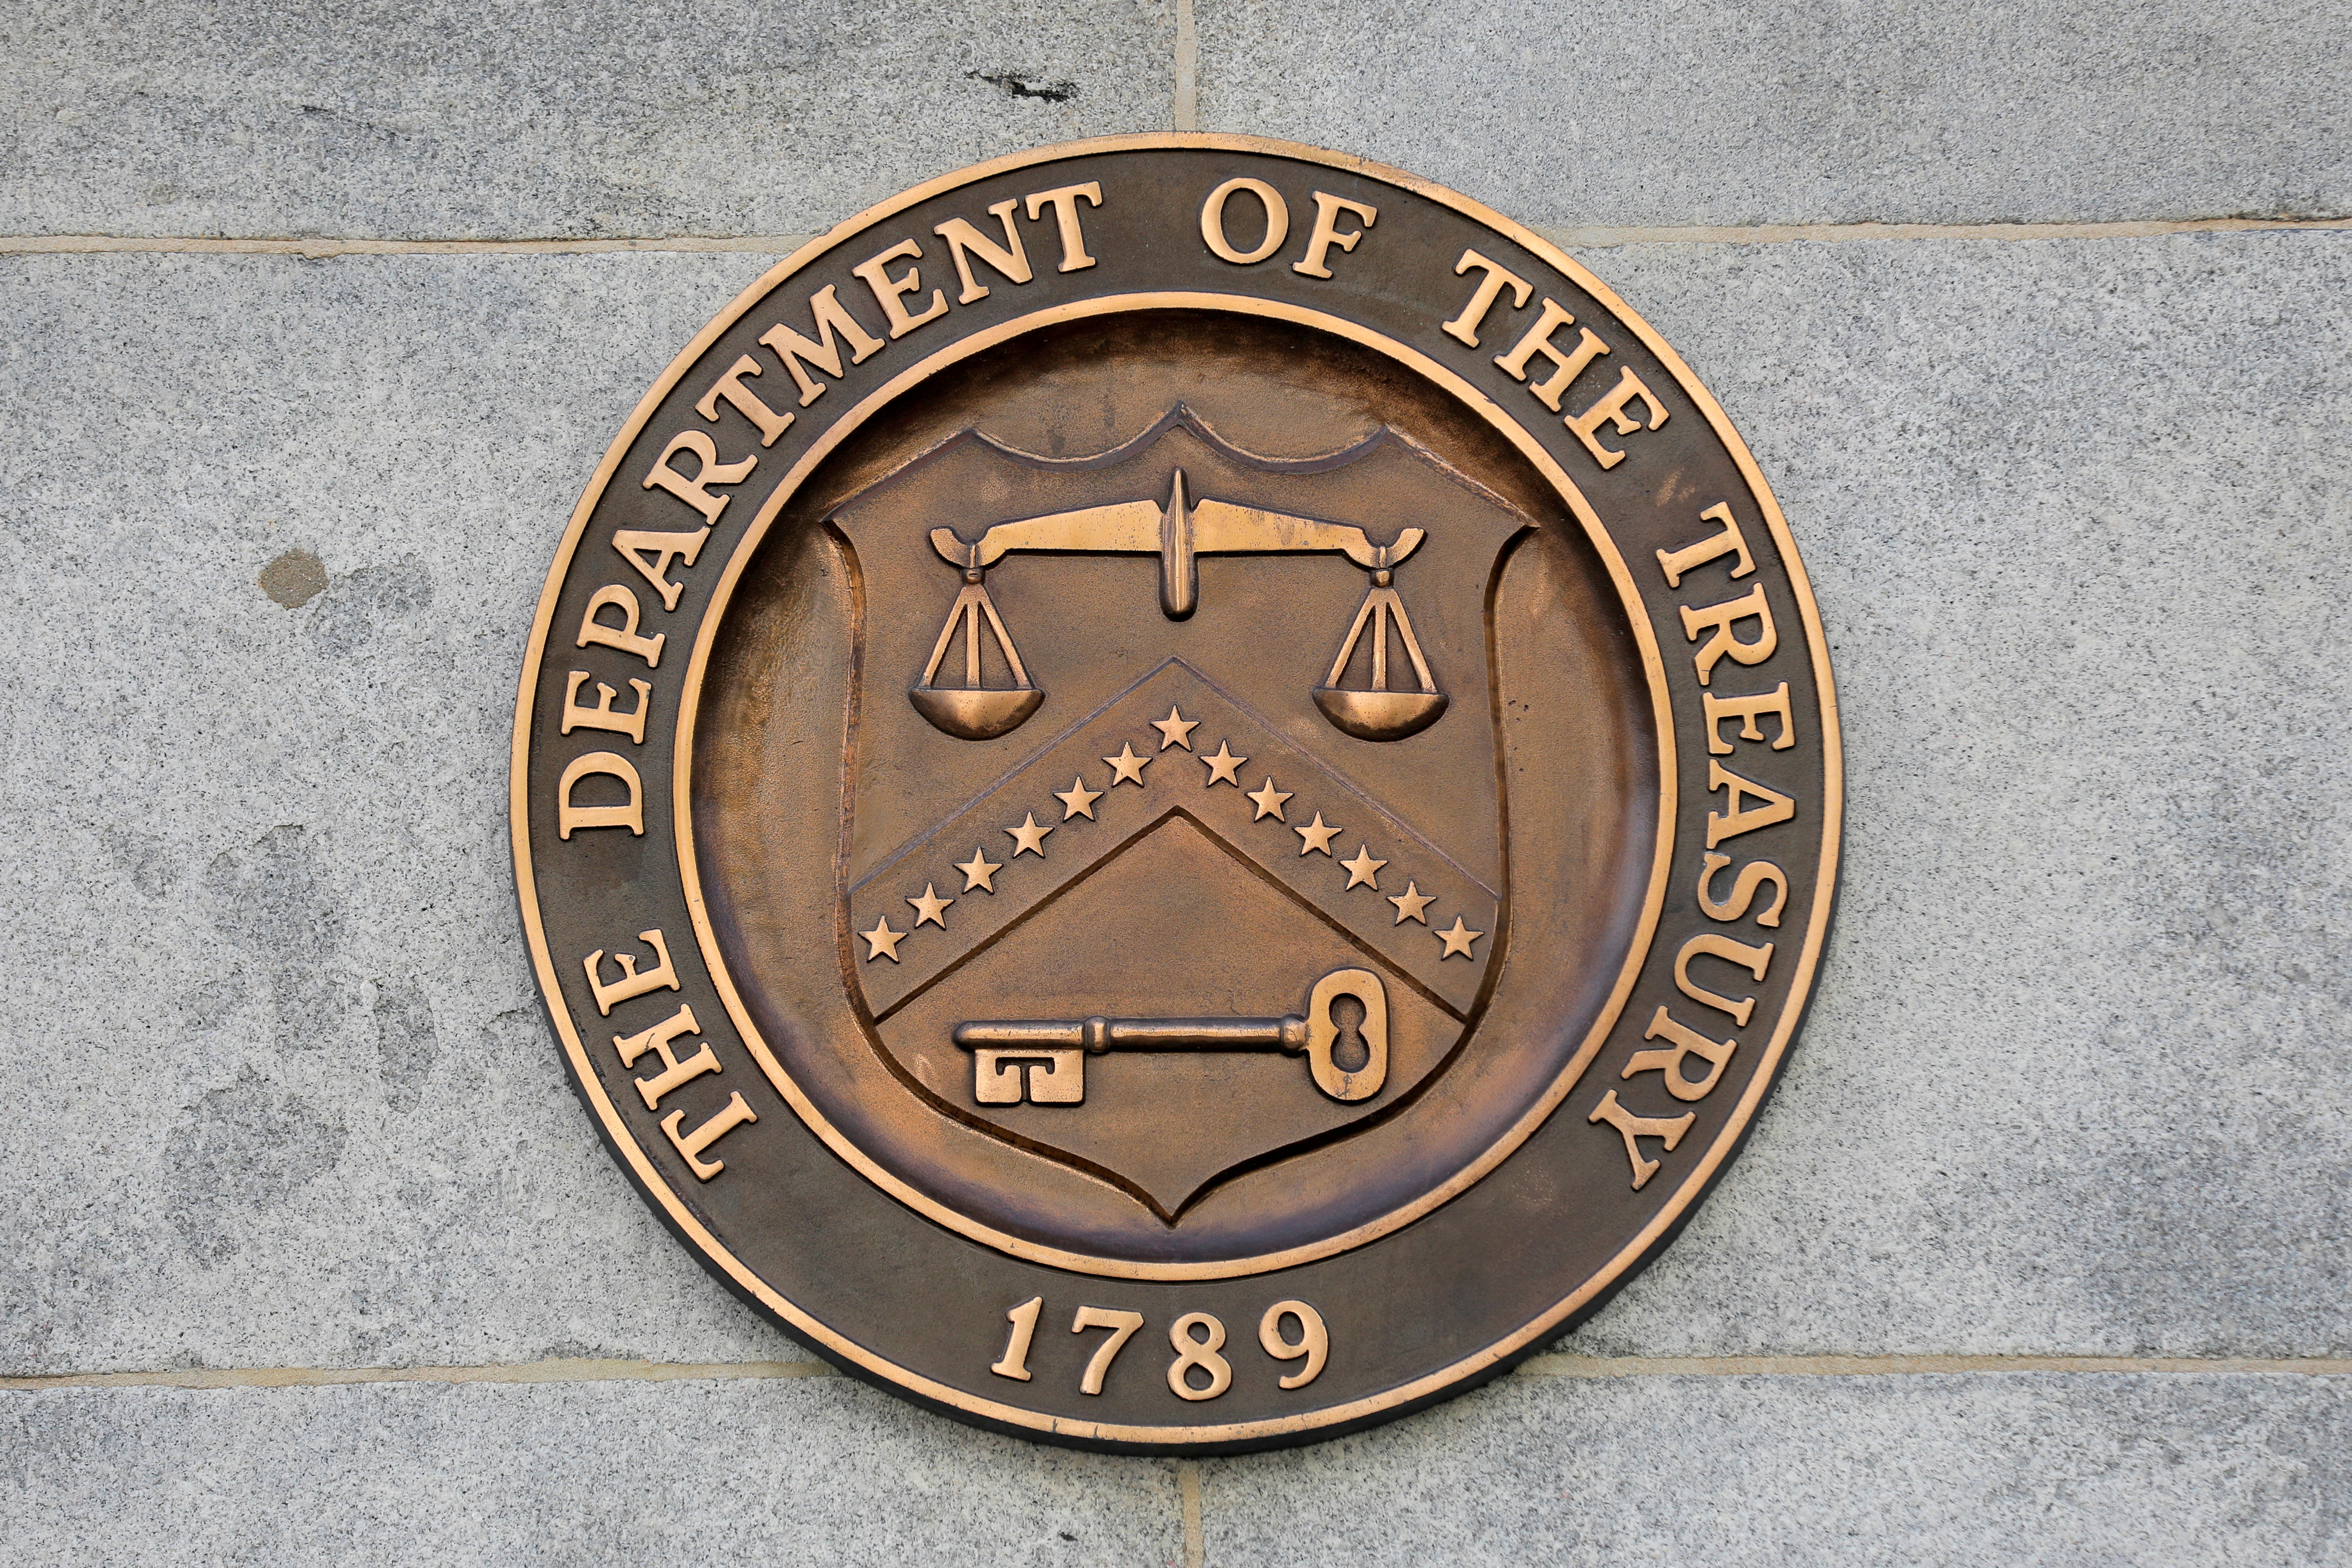 Signage is seen at the United States Department of the Treasury headquarters in Washington, D.C.